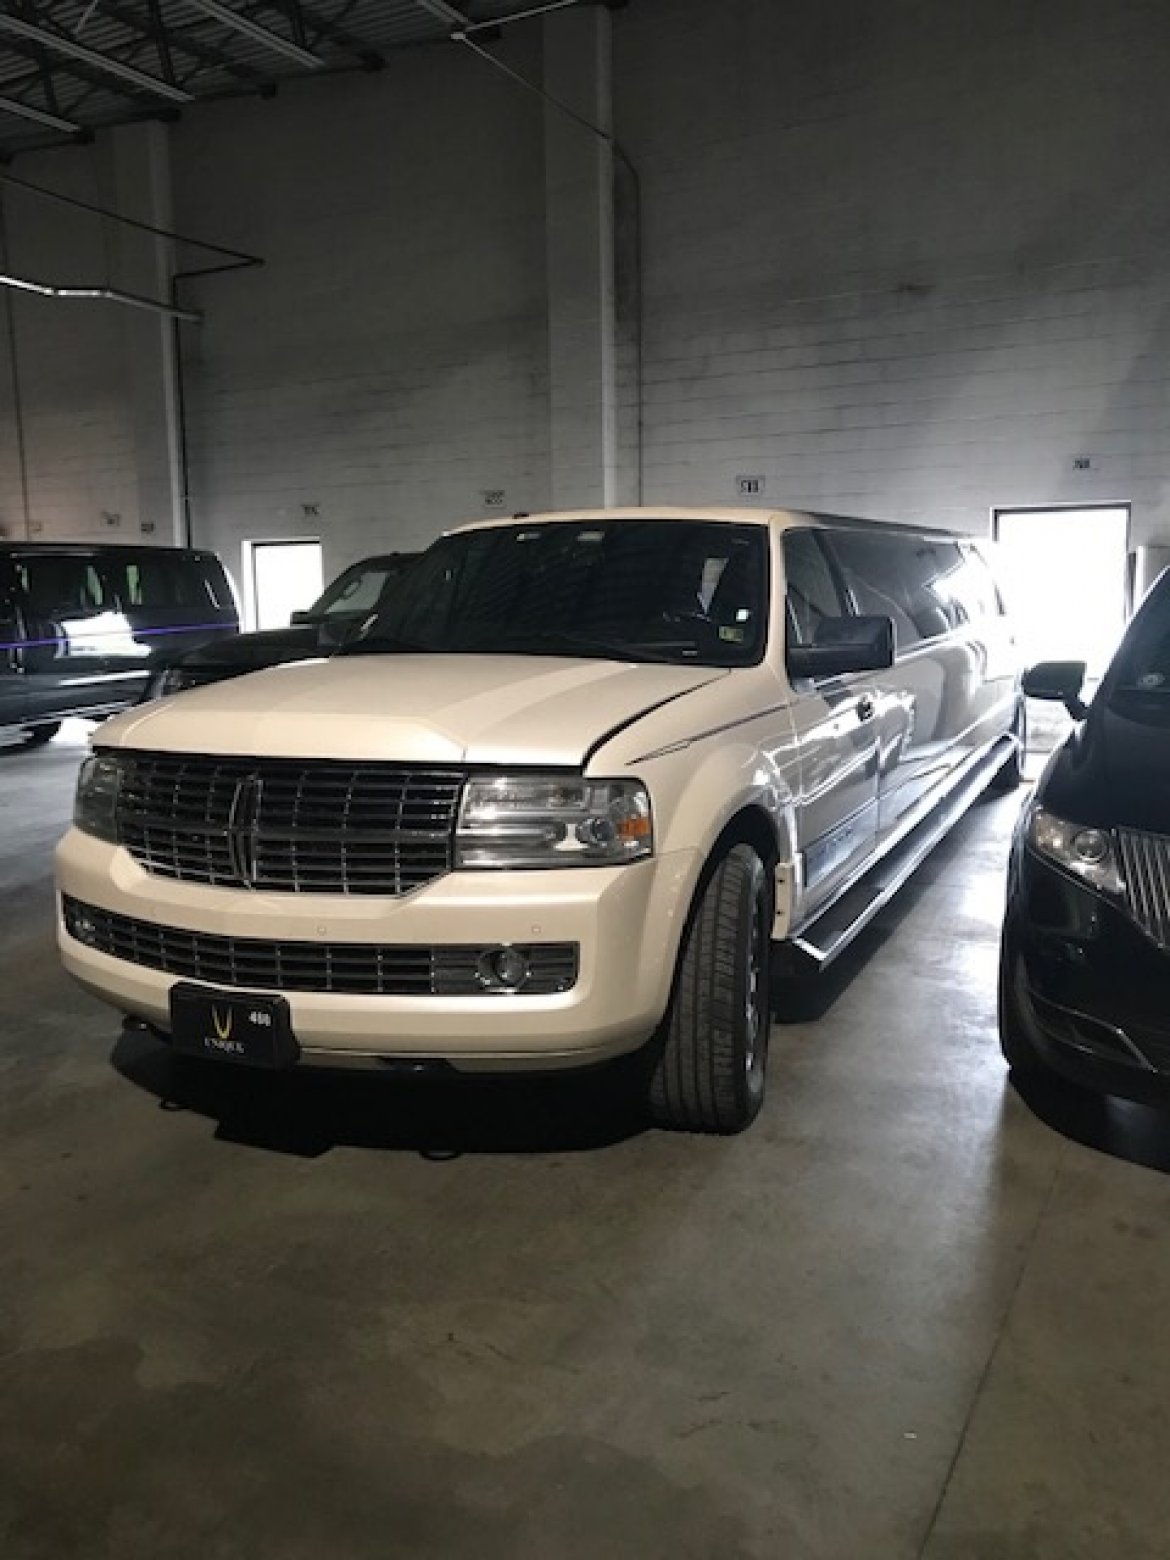 SUV Stretch for sale: 2009 Lincoln Navigator by Executive Coach Builders